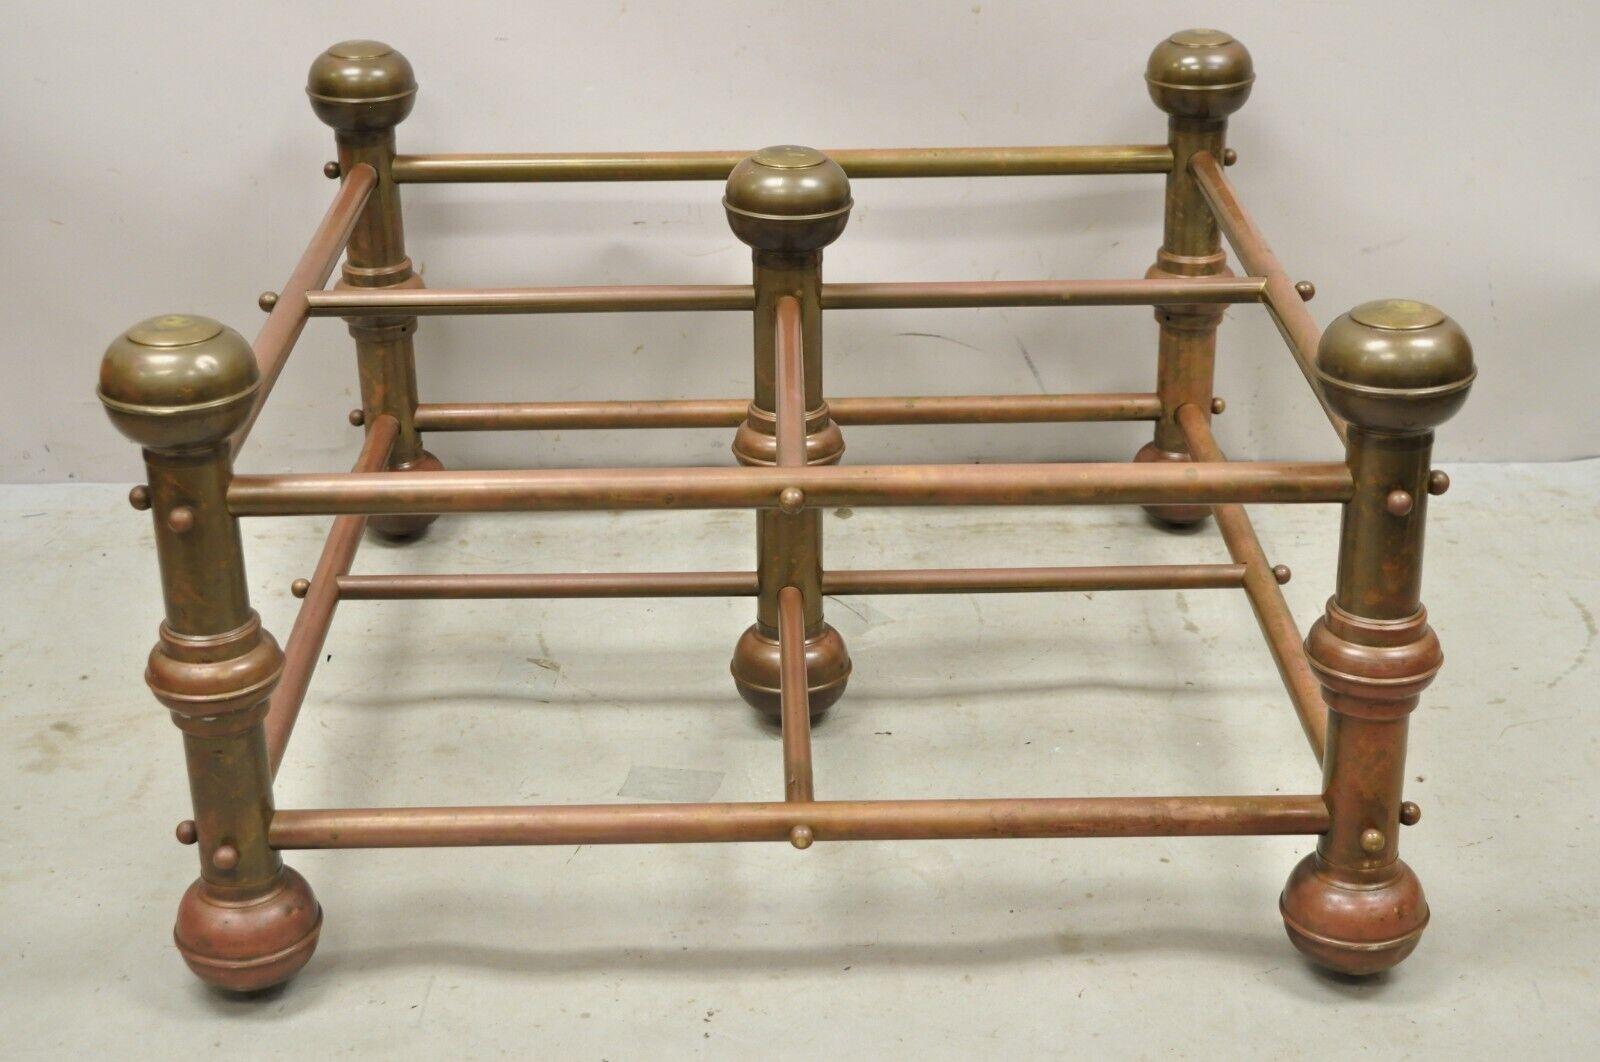 Antique Victorian Turned Brass Bed Style Pipe Post Square Coffee Table Base. Circa 19th Century. Measurements: 18